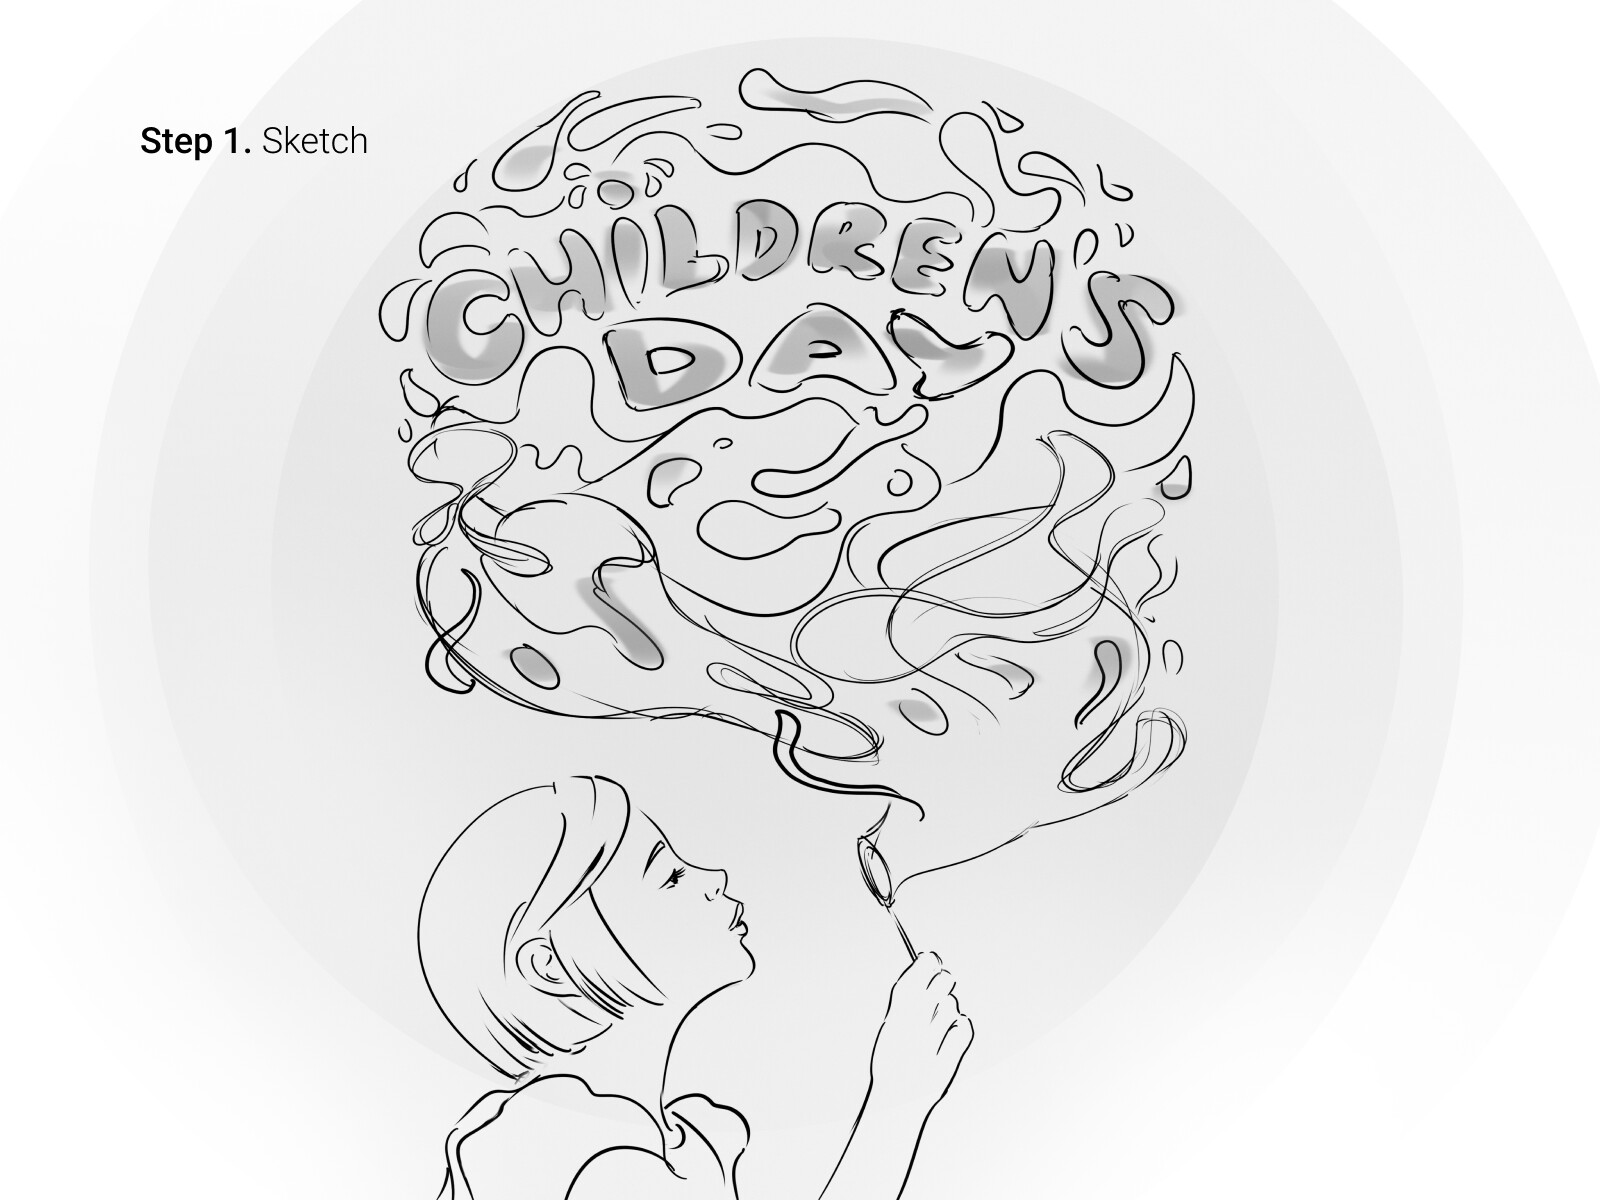 Children's Day Drawing | Children's day drawing tutorial, Children's day  drawing Specially dedicated to all kids around the world and my to all my  students. Happy Children's... | By Tiny Prints Art AcademyFacebook